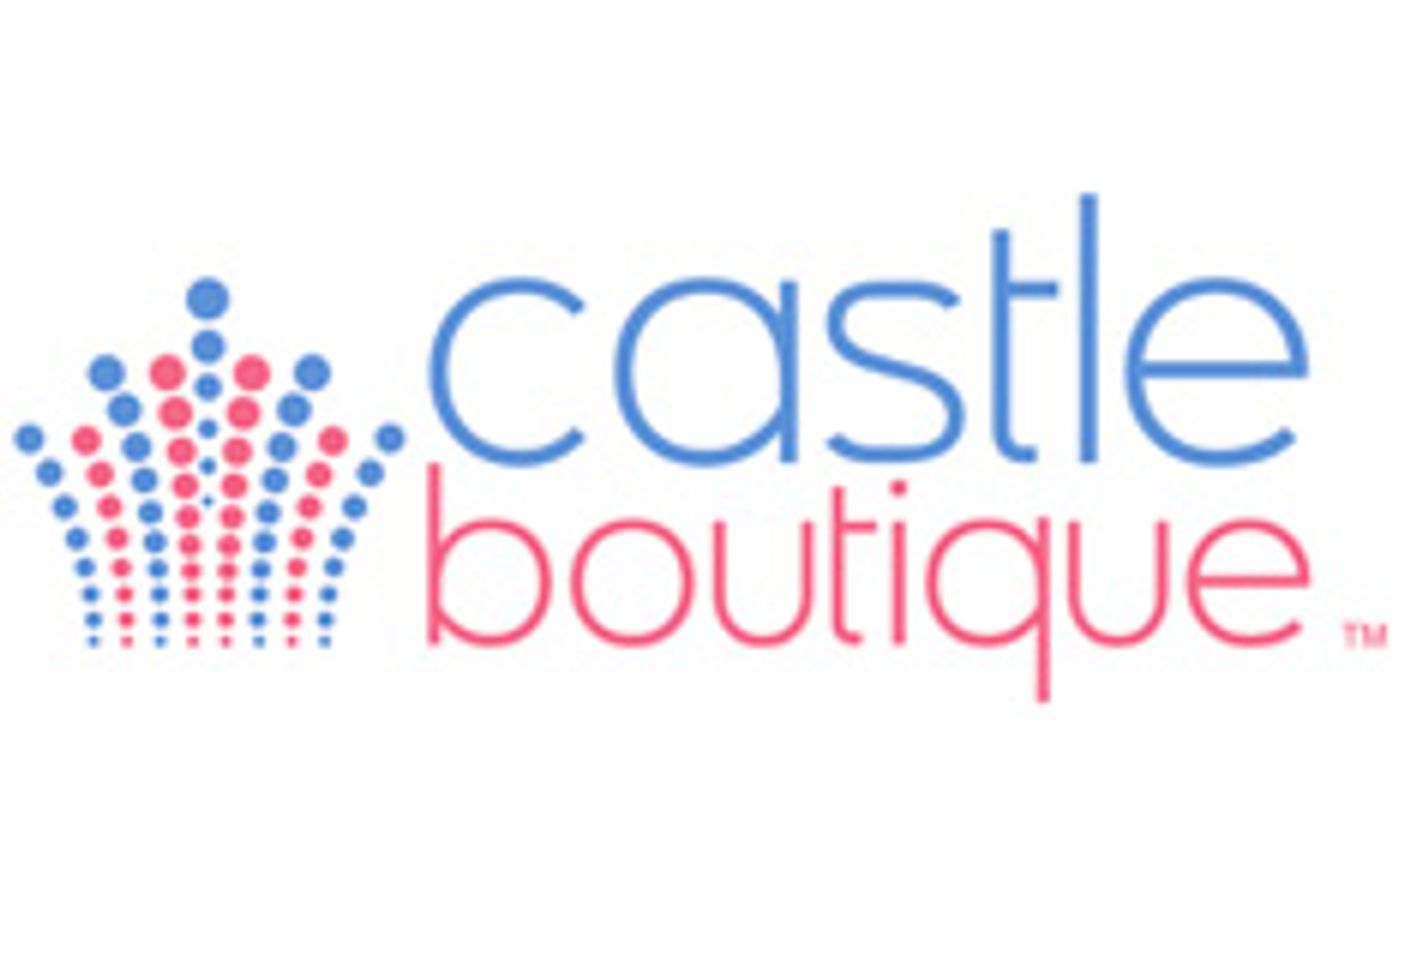 Castle Boutique Introduces New Concept in Love and Romance